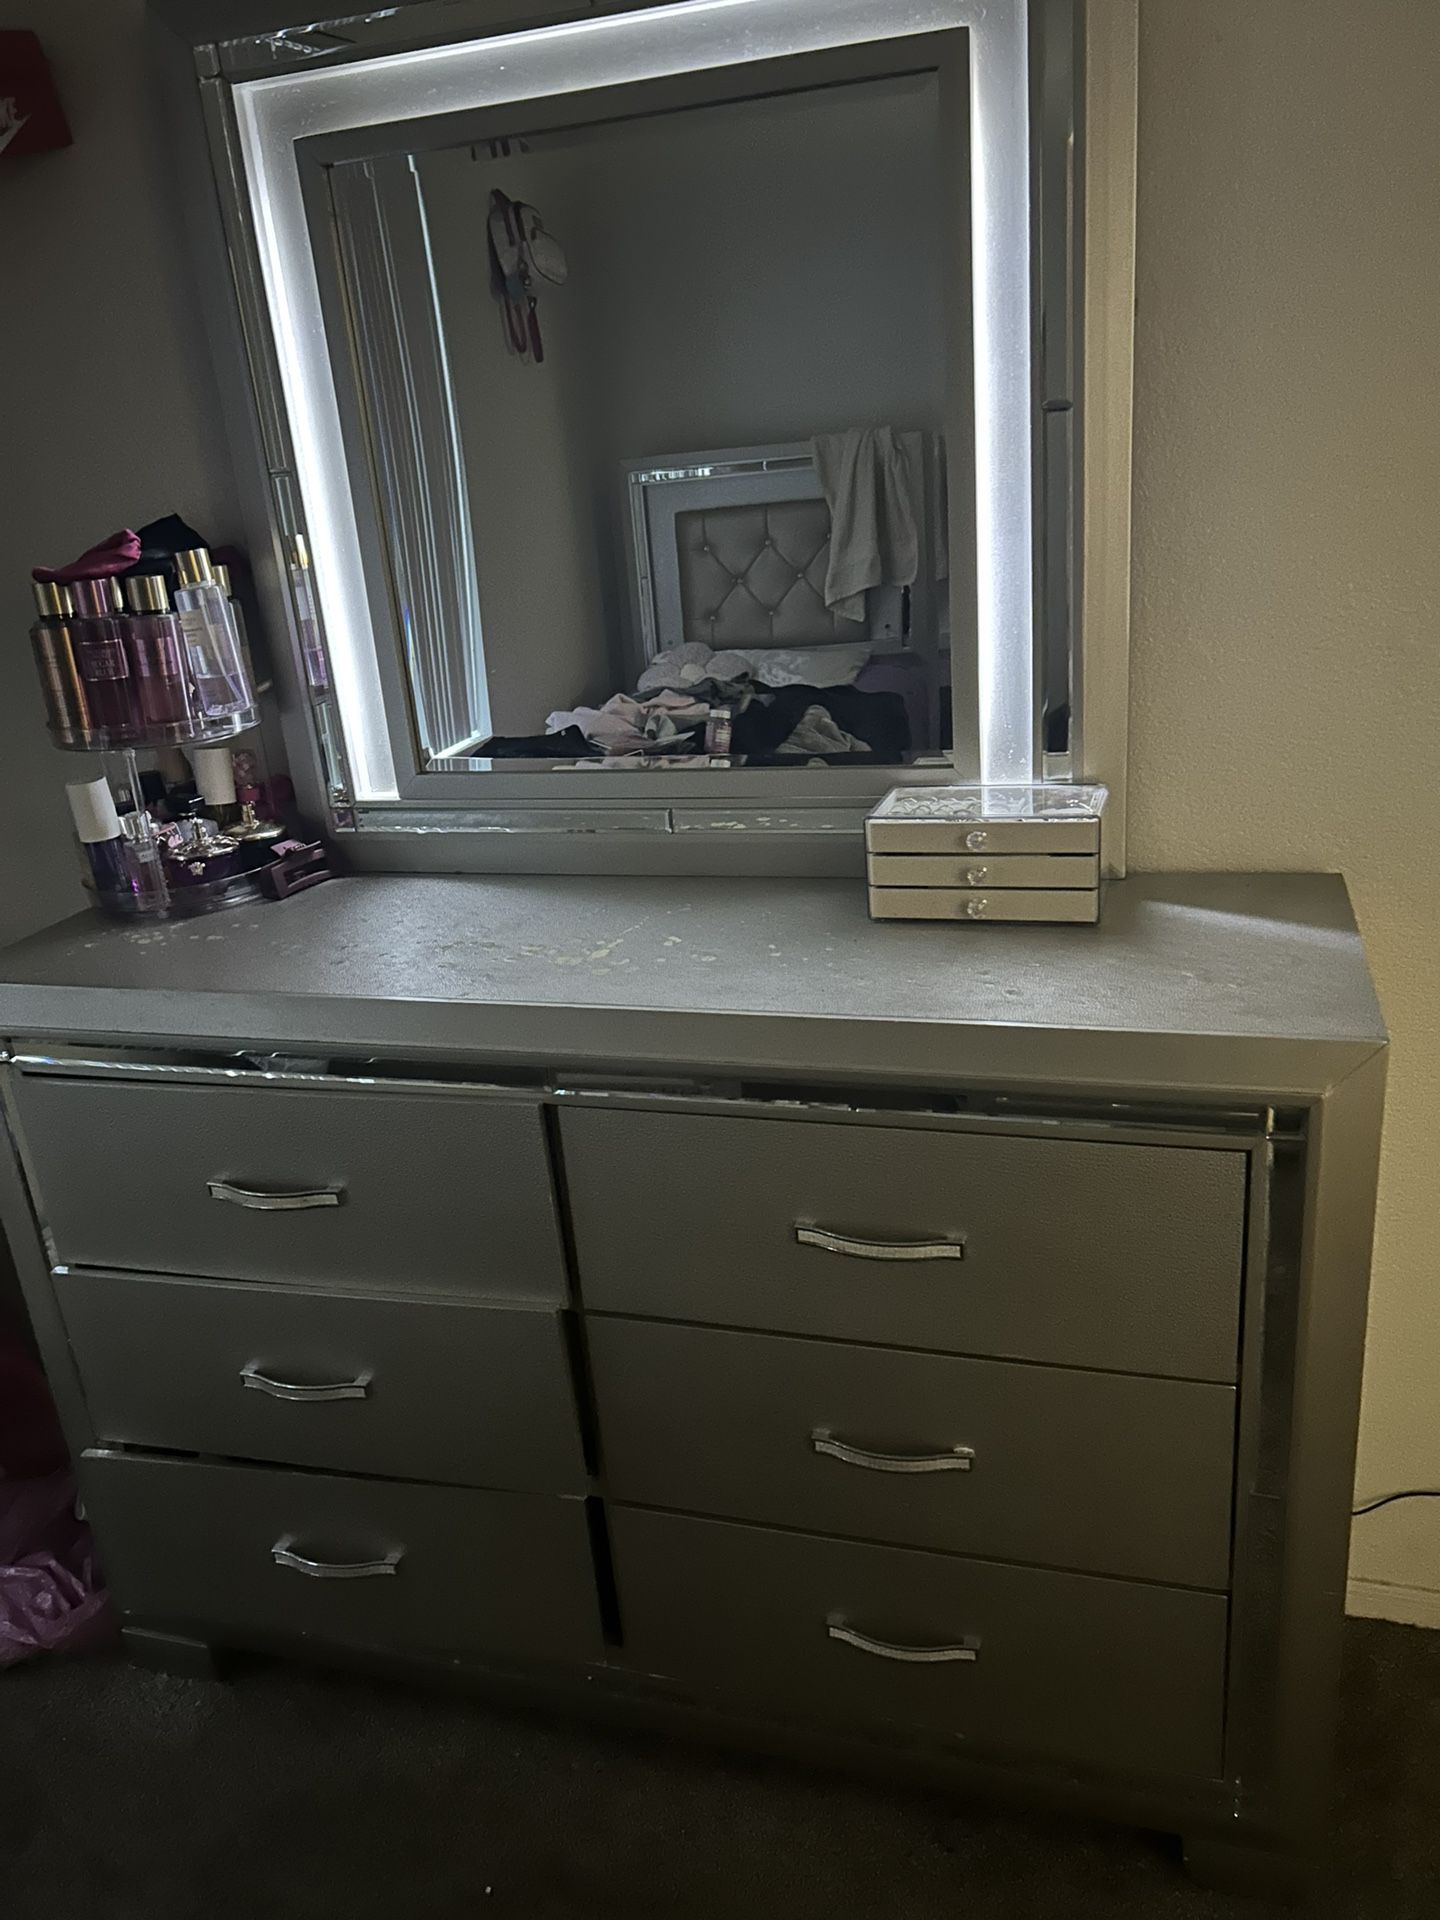 Glamour Dresser With Light Mirror W/ Two twin Beds And Mattresses (if wanted)